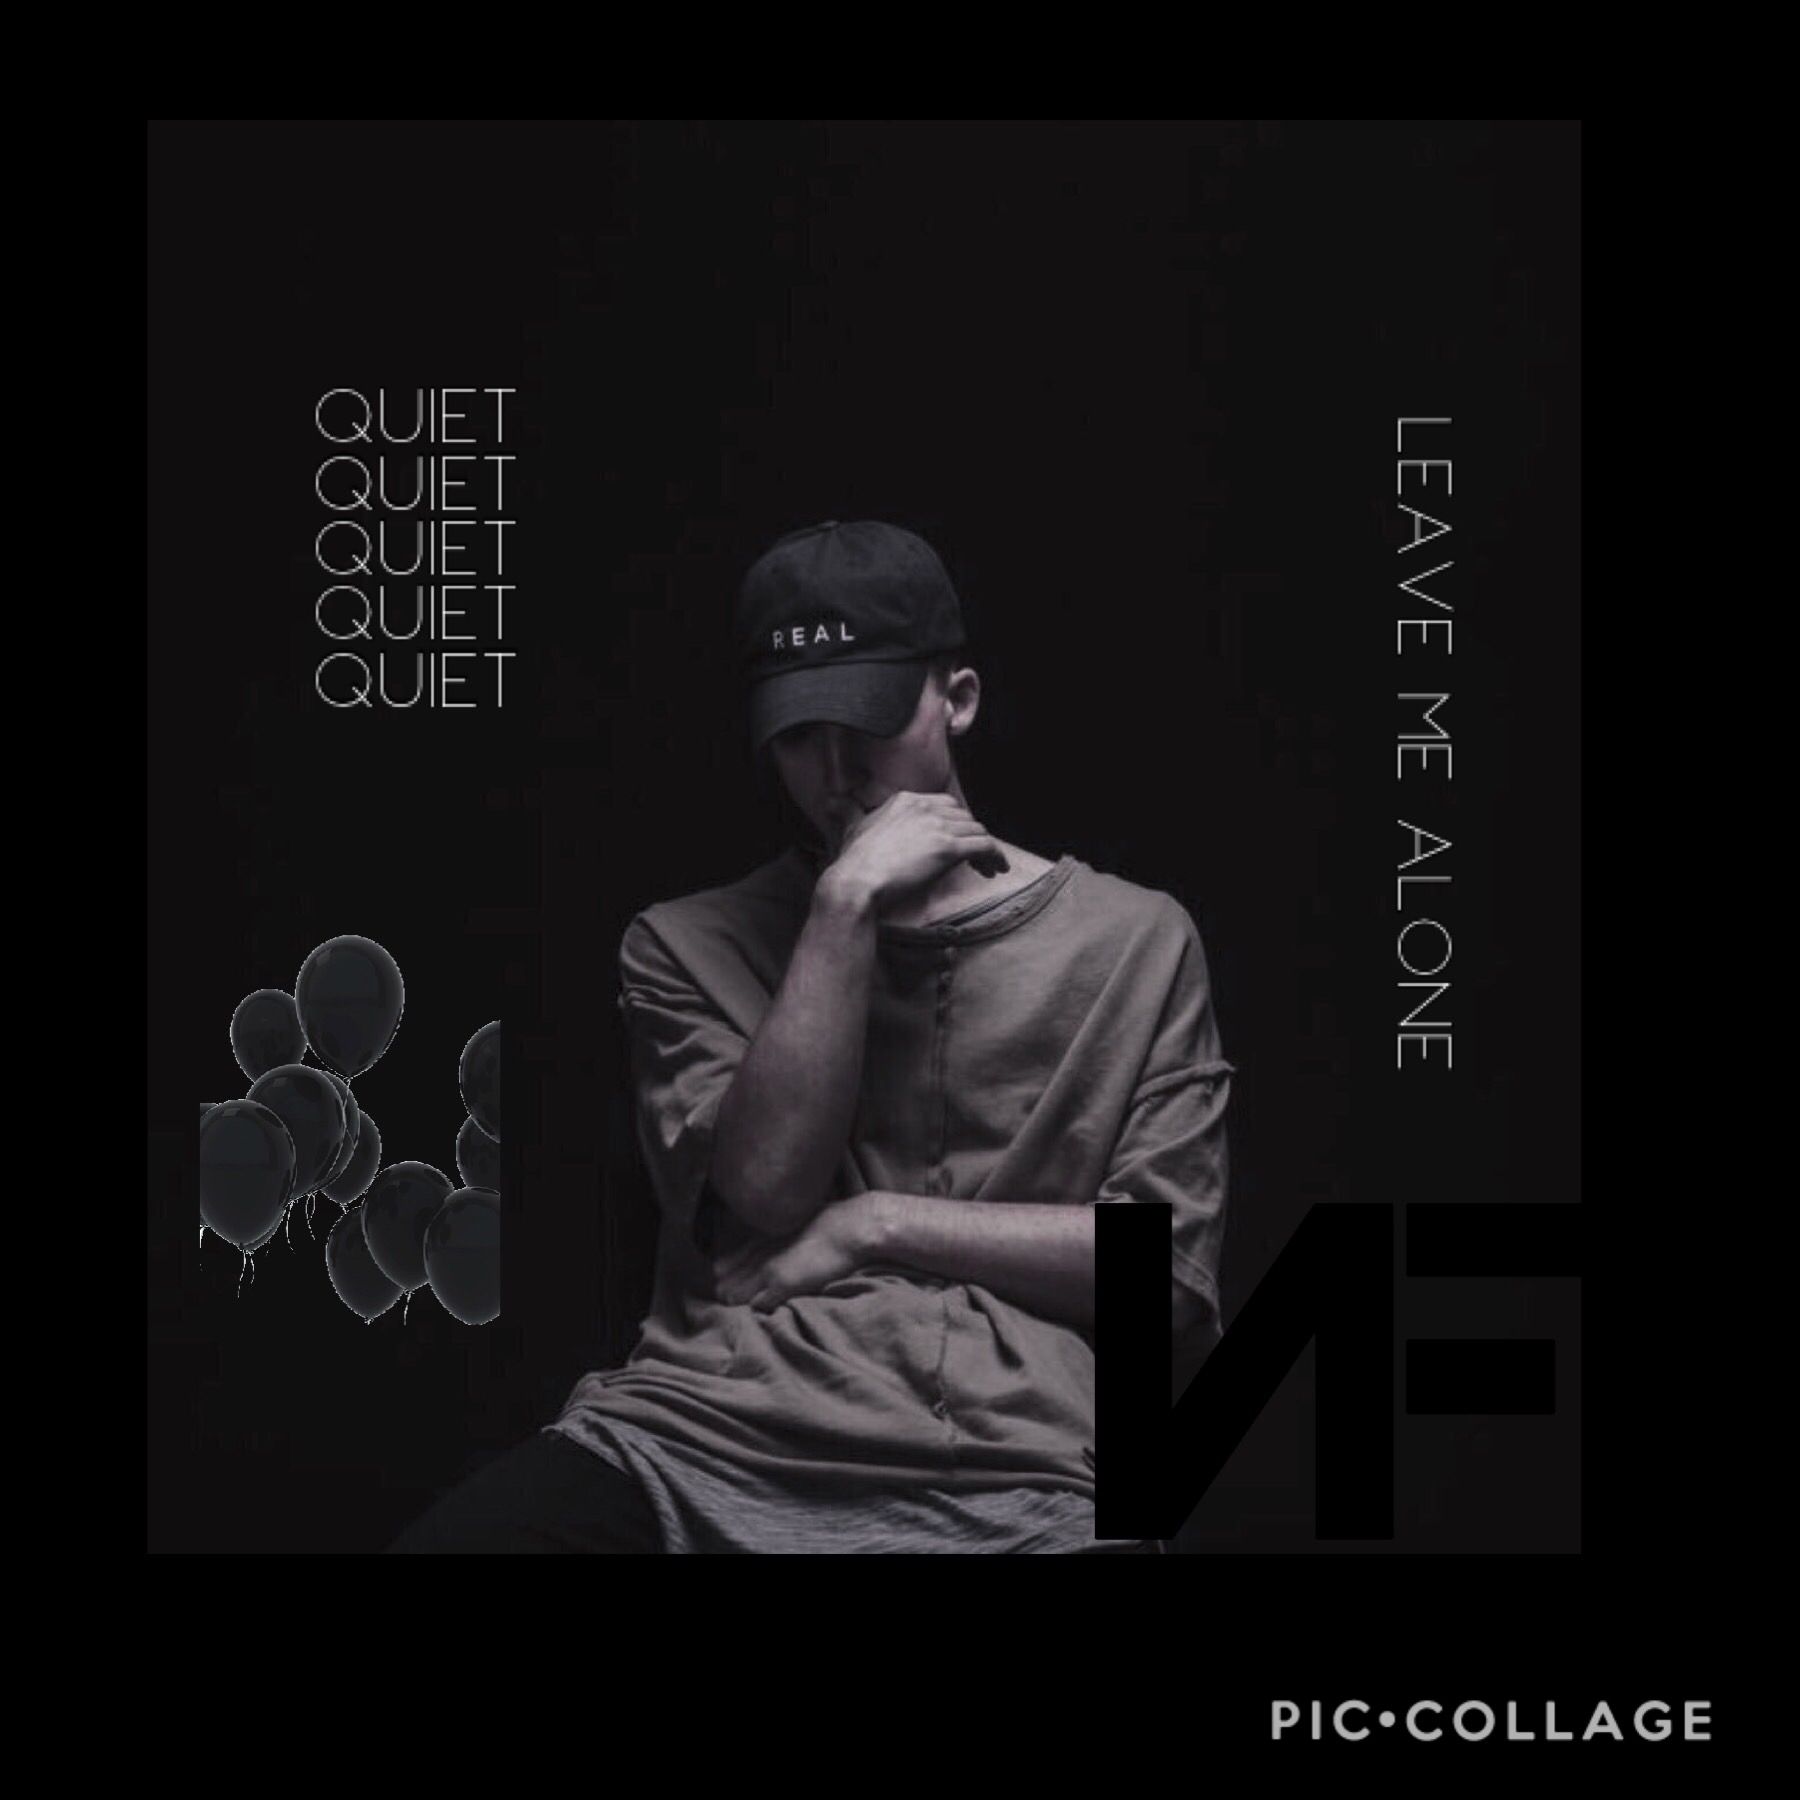 NF #edit #nfrealmusic. Nf real music, Nf quotes, Music is life